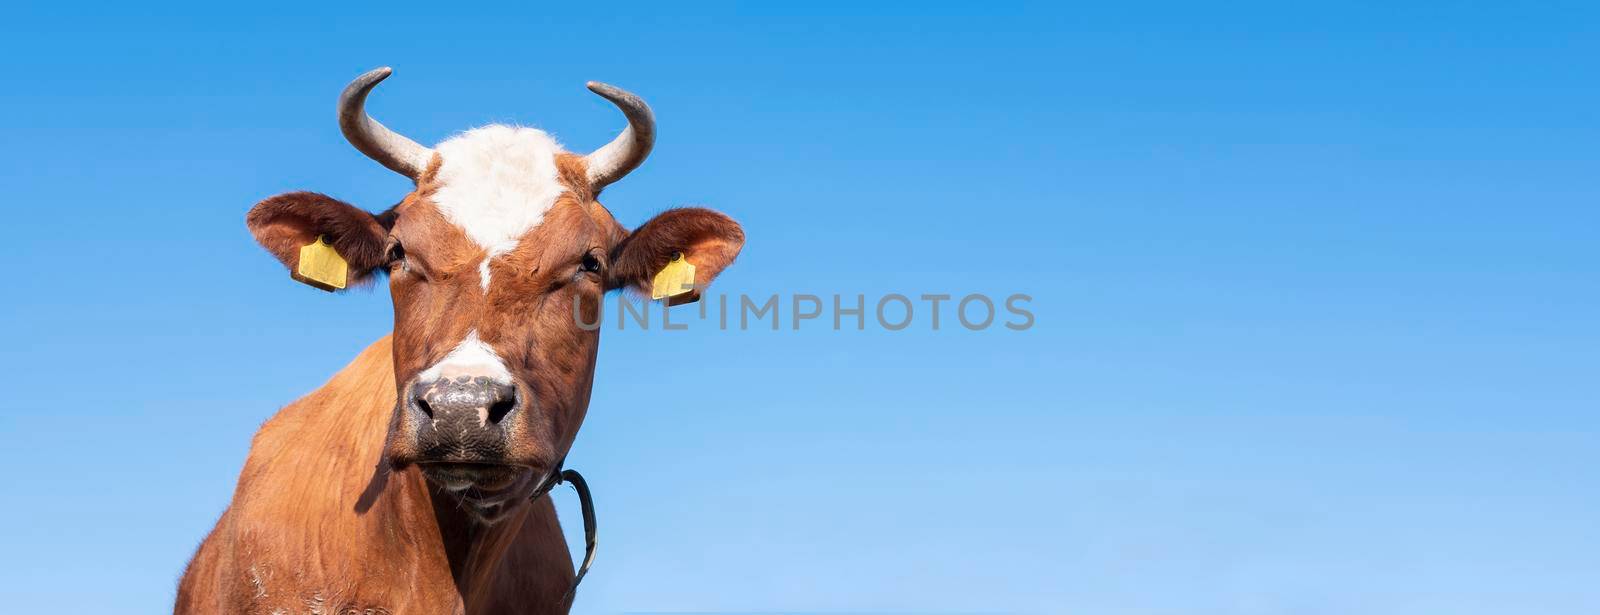 horned head of red brown spotted cow against background of blue sky by ahavelaar